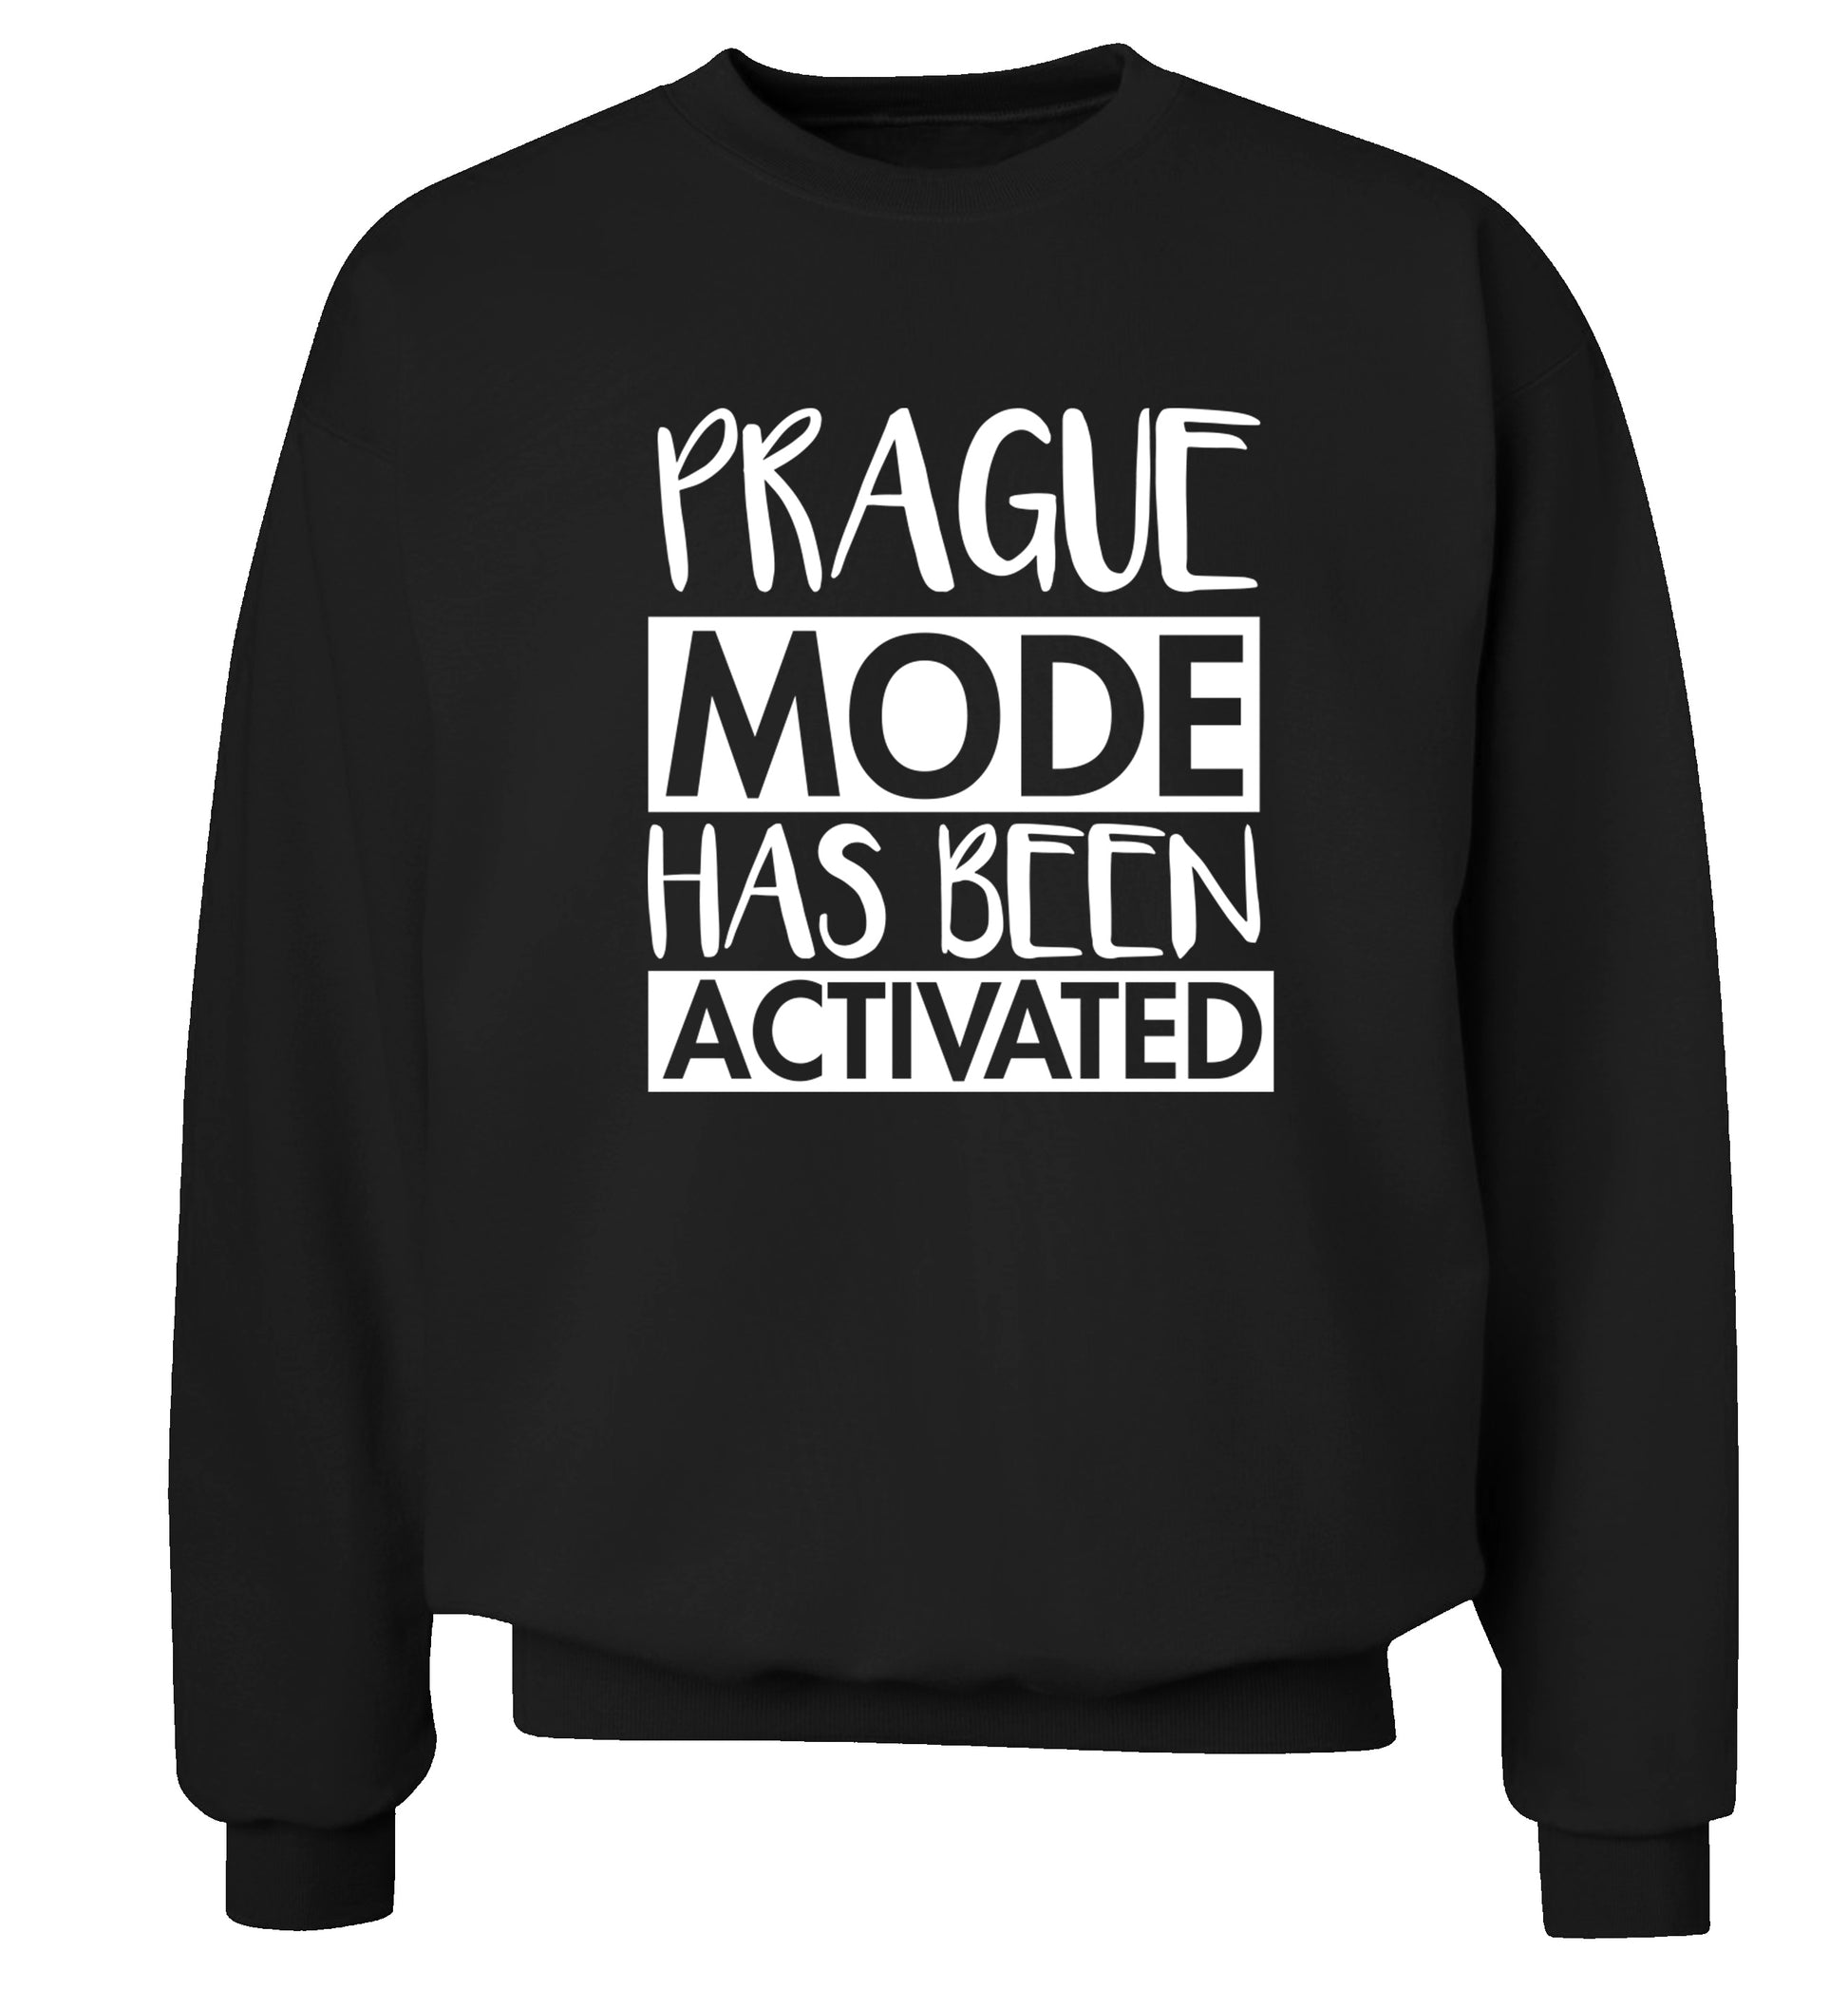 Prague mode has been activated Adult's unisex black Sweater 2XL